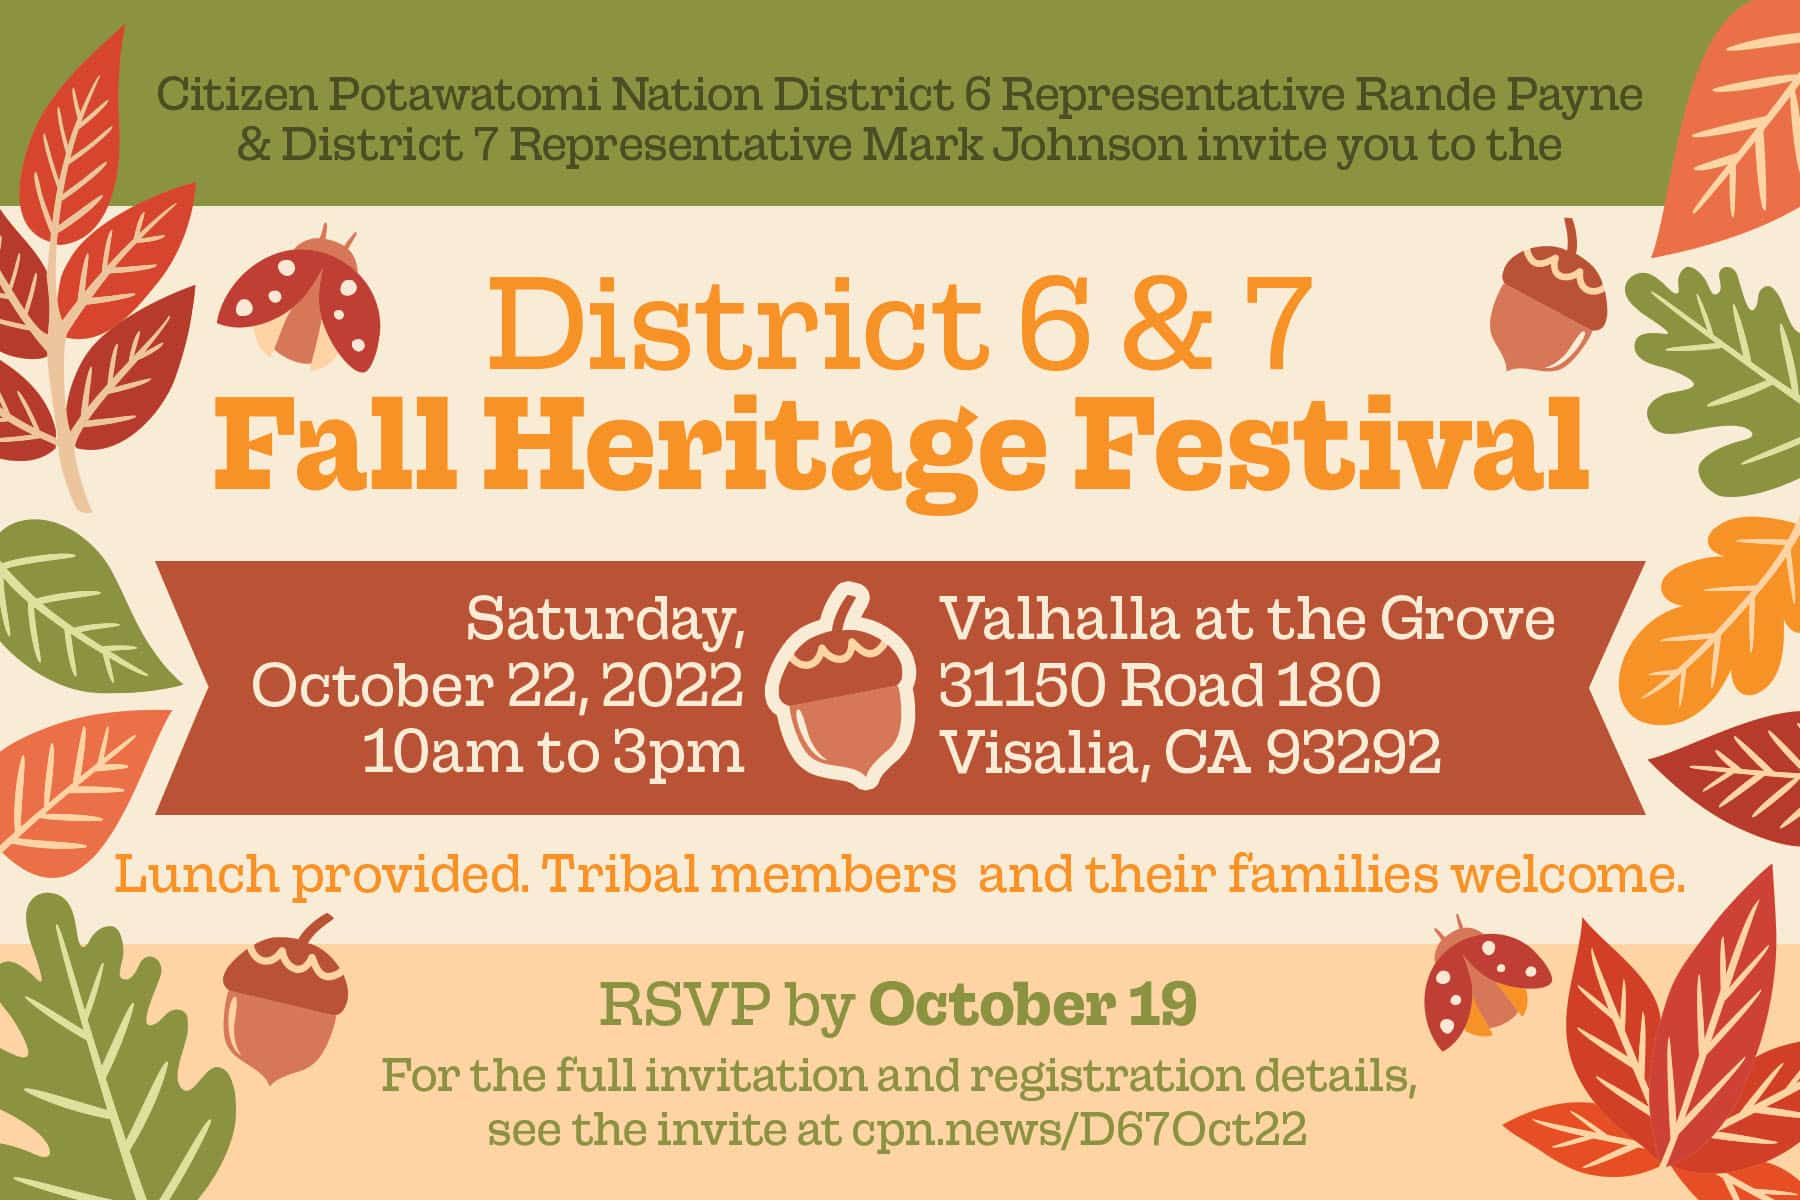 A green, brown and orange striped post card with fall leaves framing it inviting CPN Tribal members to a District 6 & 7 Fall Heritage Festival on October 22.